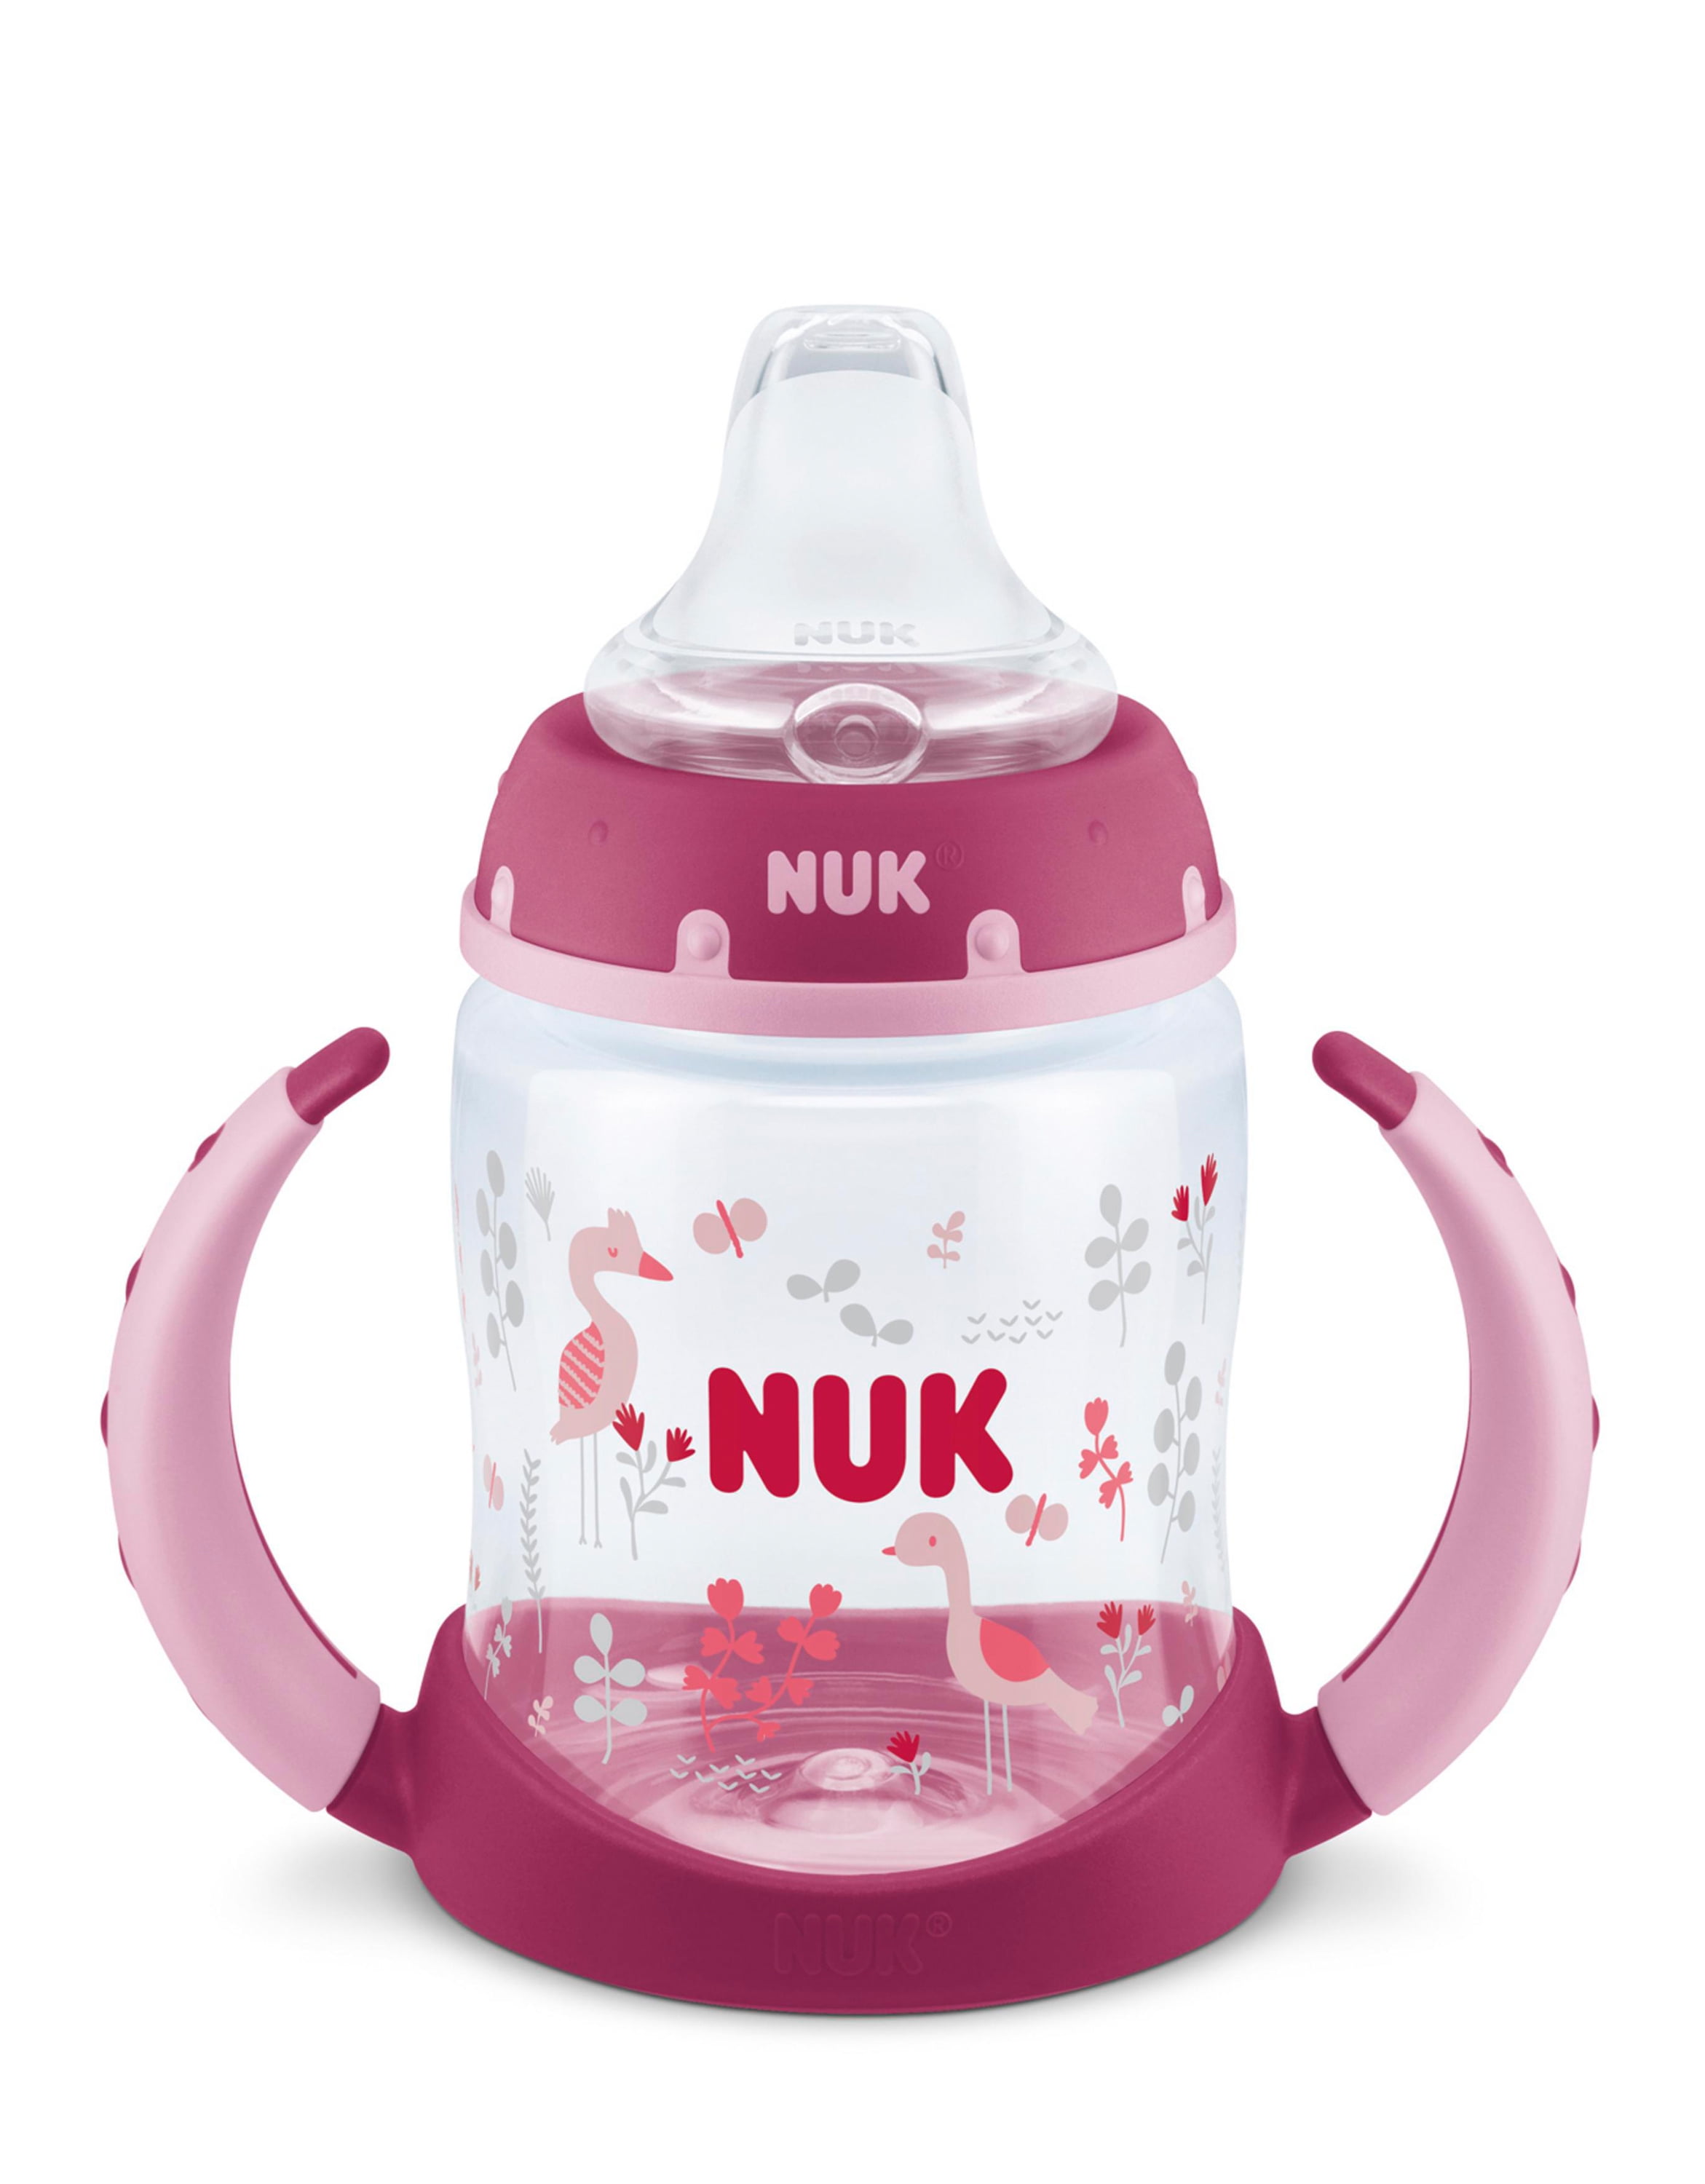 nuk sippy cup